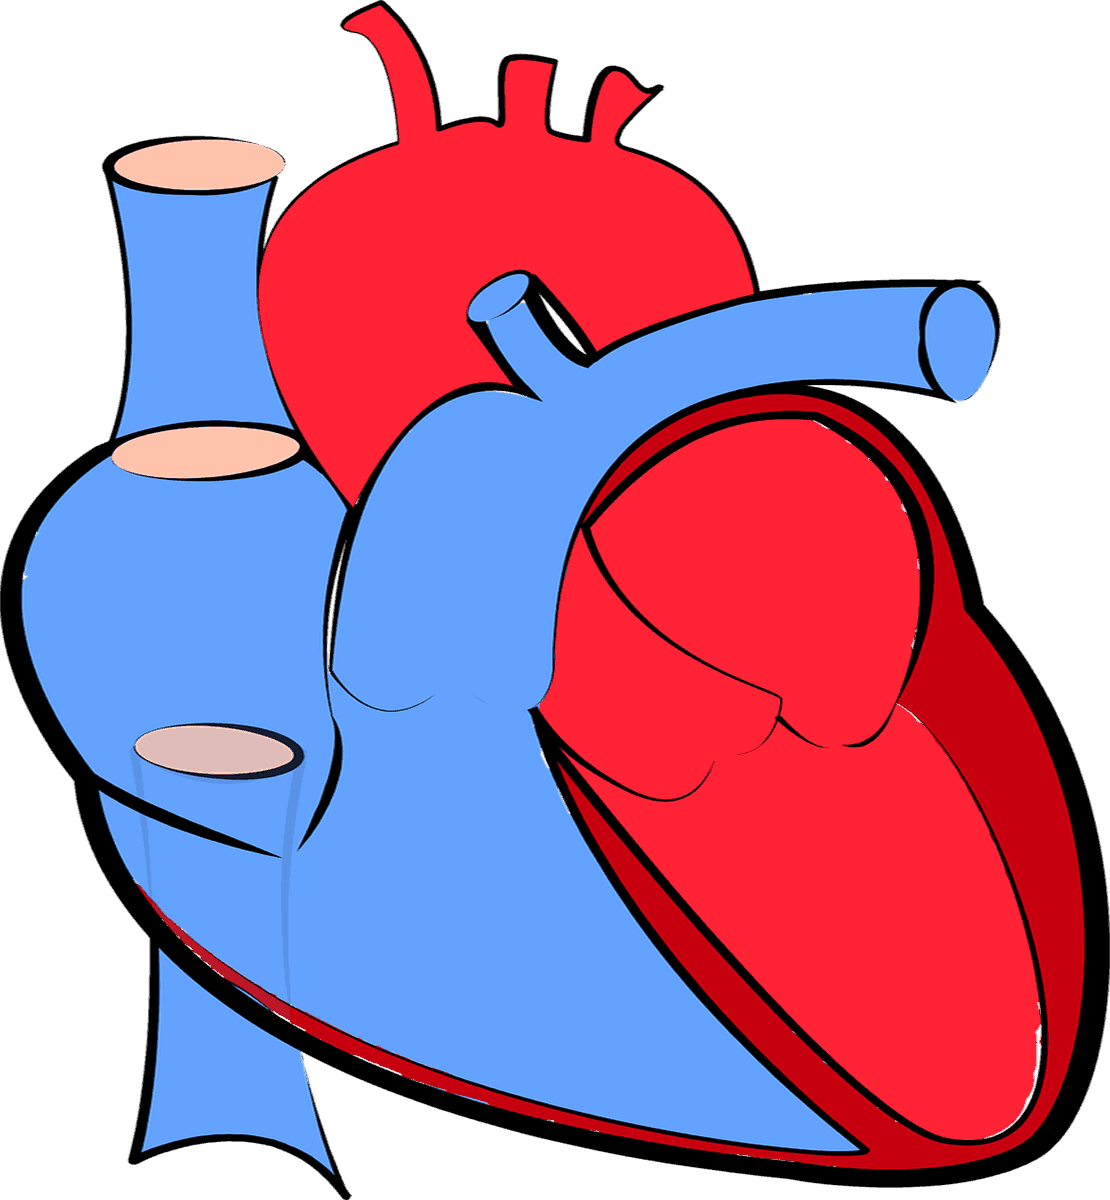 What Is The Purpose Of The Coronary Artery